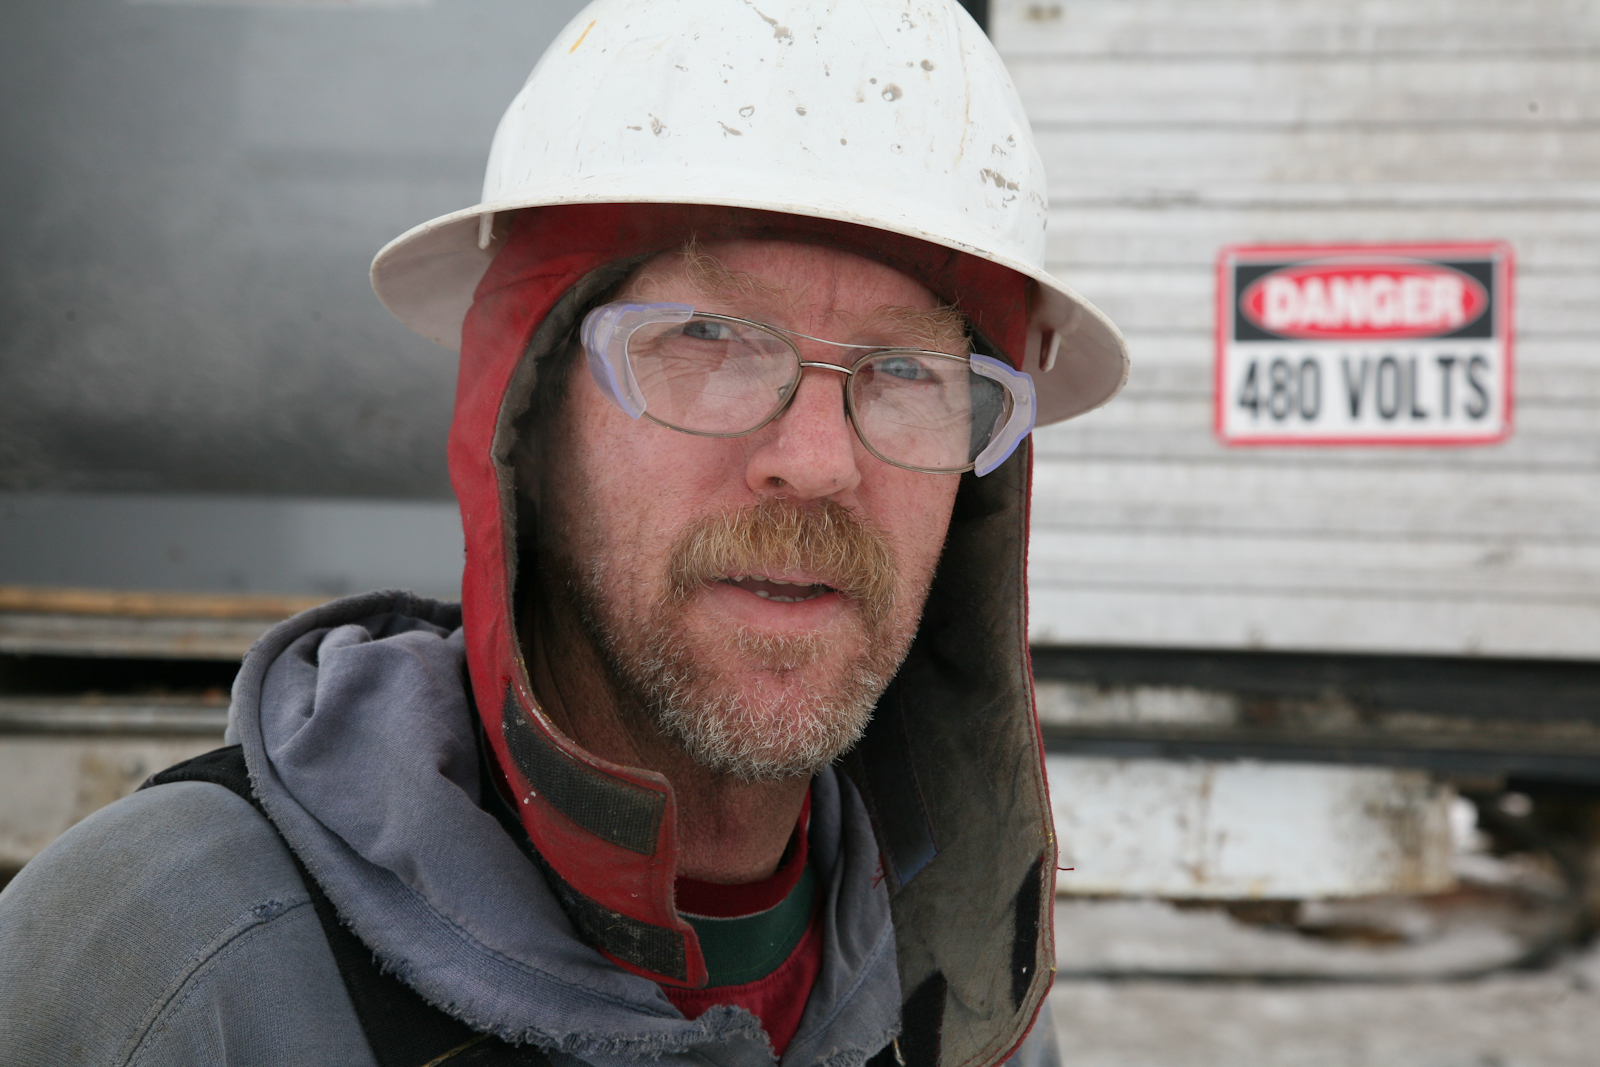 Faces of the Oil Patch